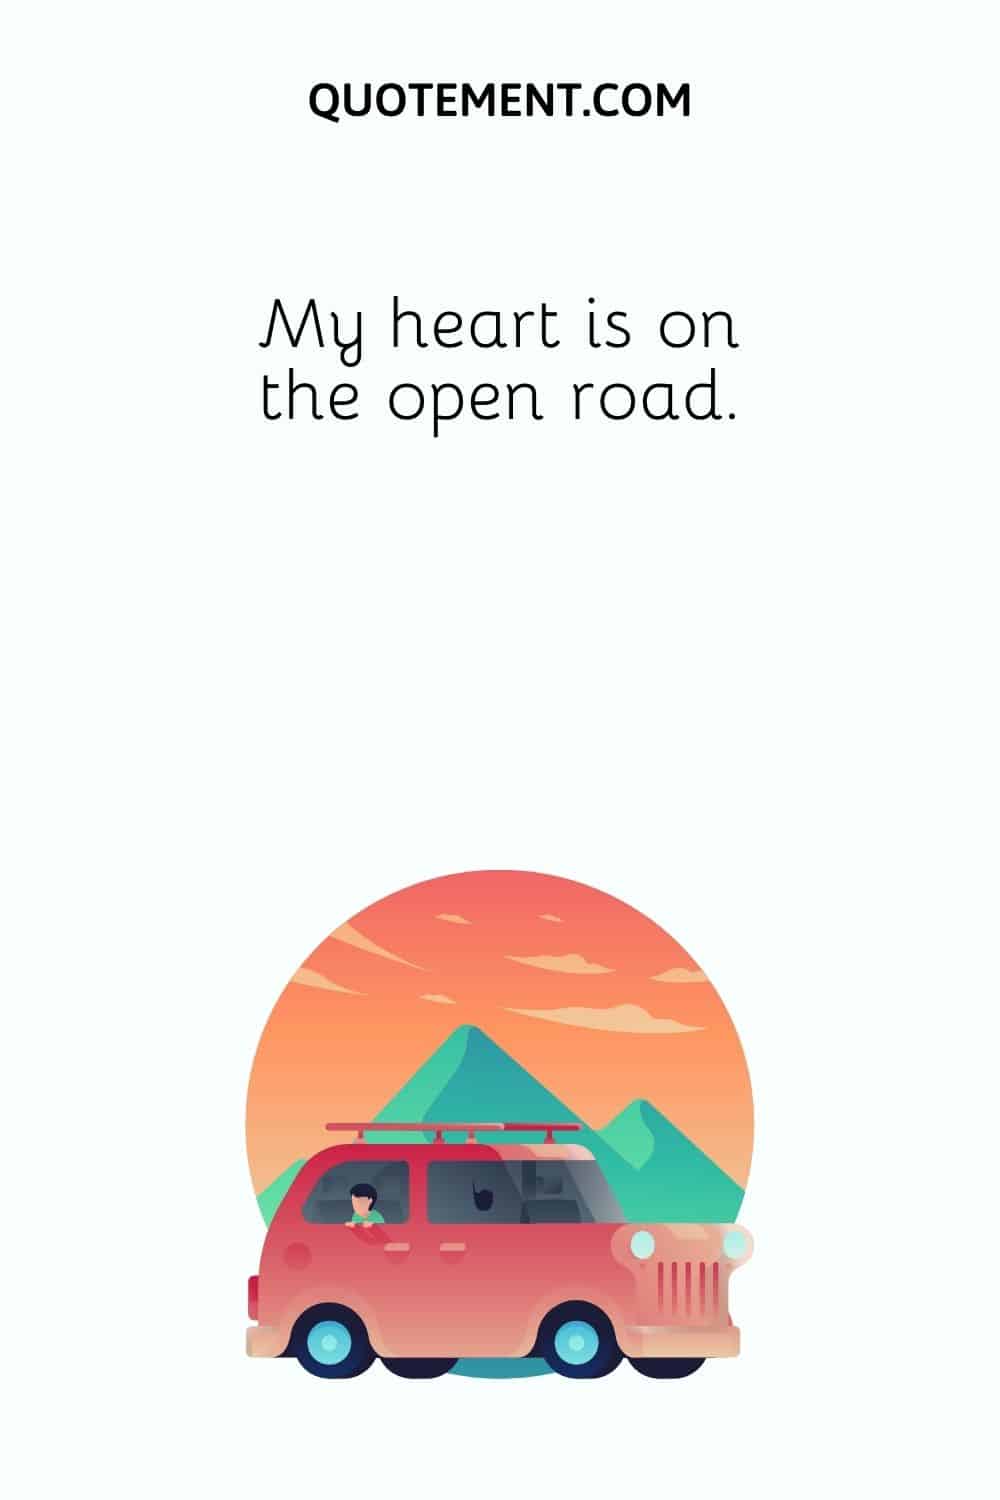 My heart is on the open road